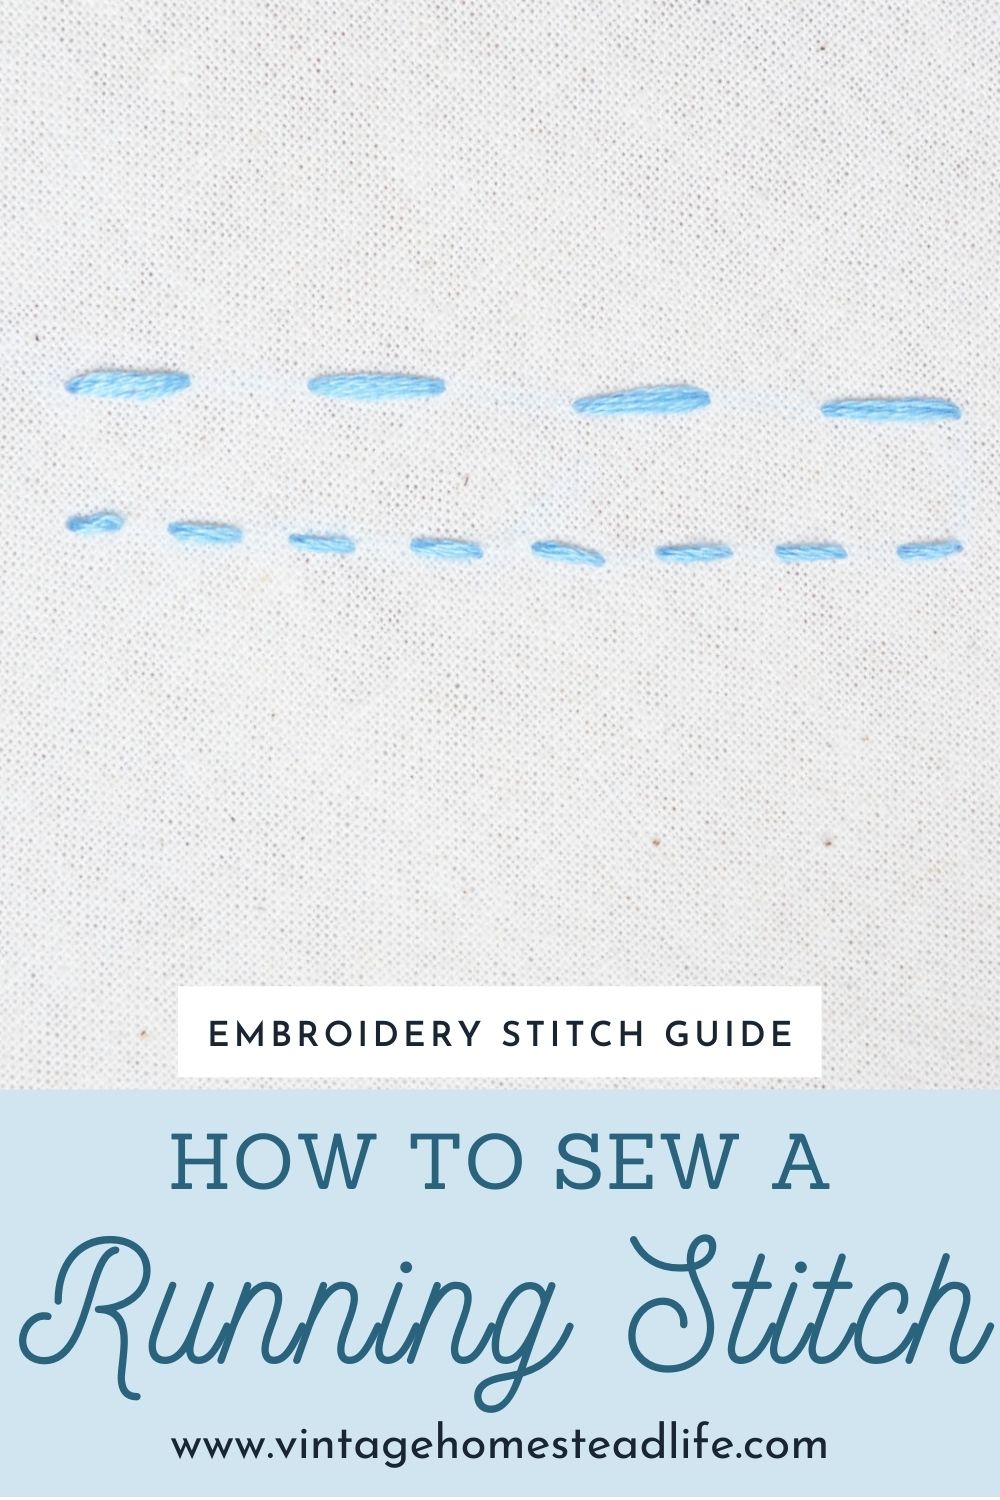 The running stitch is the most basic of all embroidery stitches. It is very simple and easy to learn!